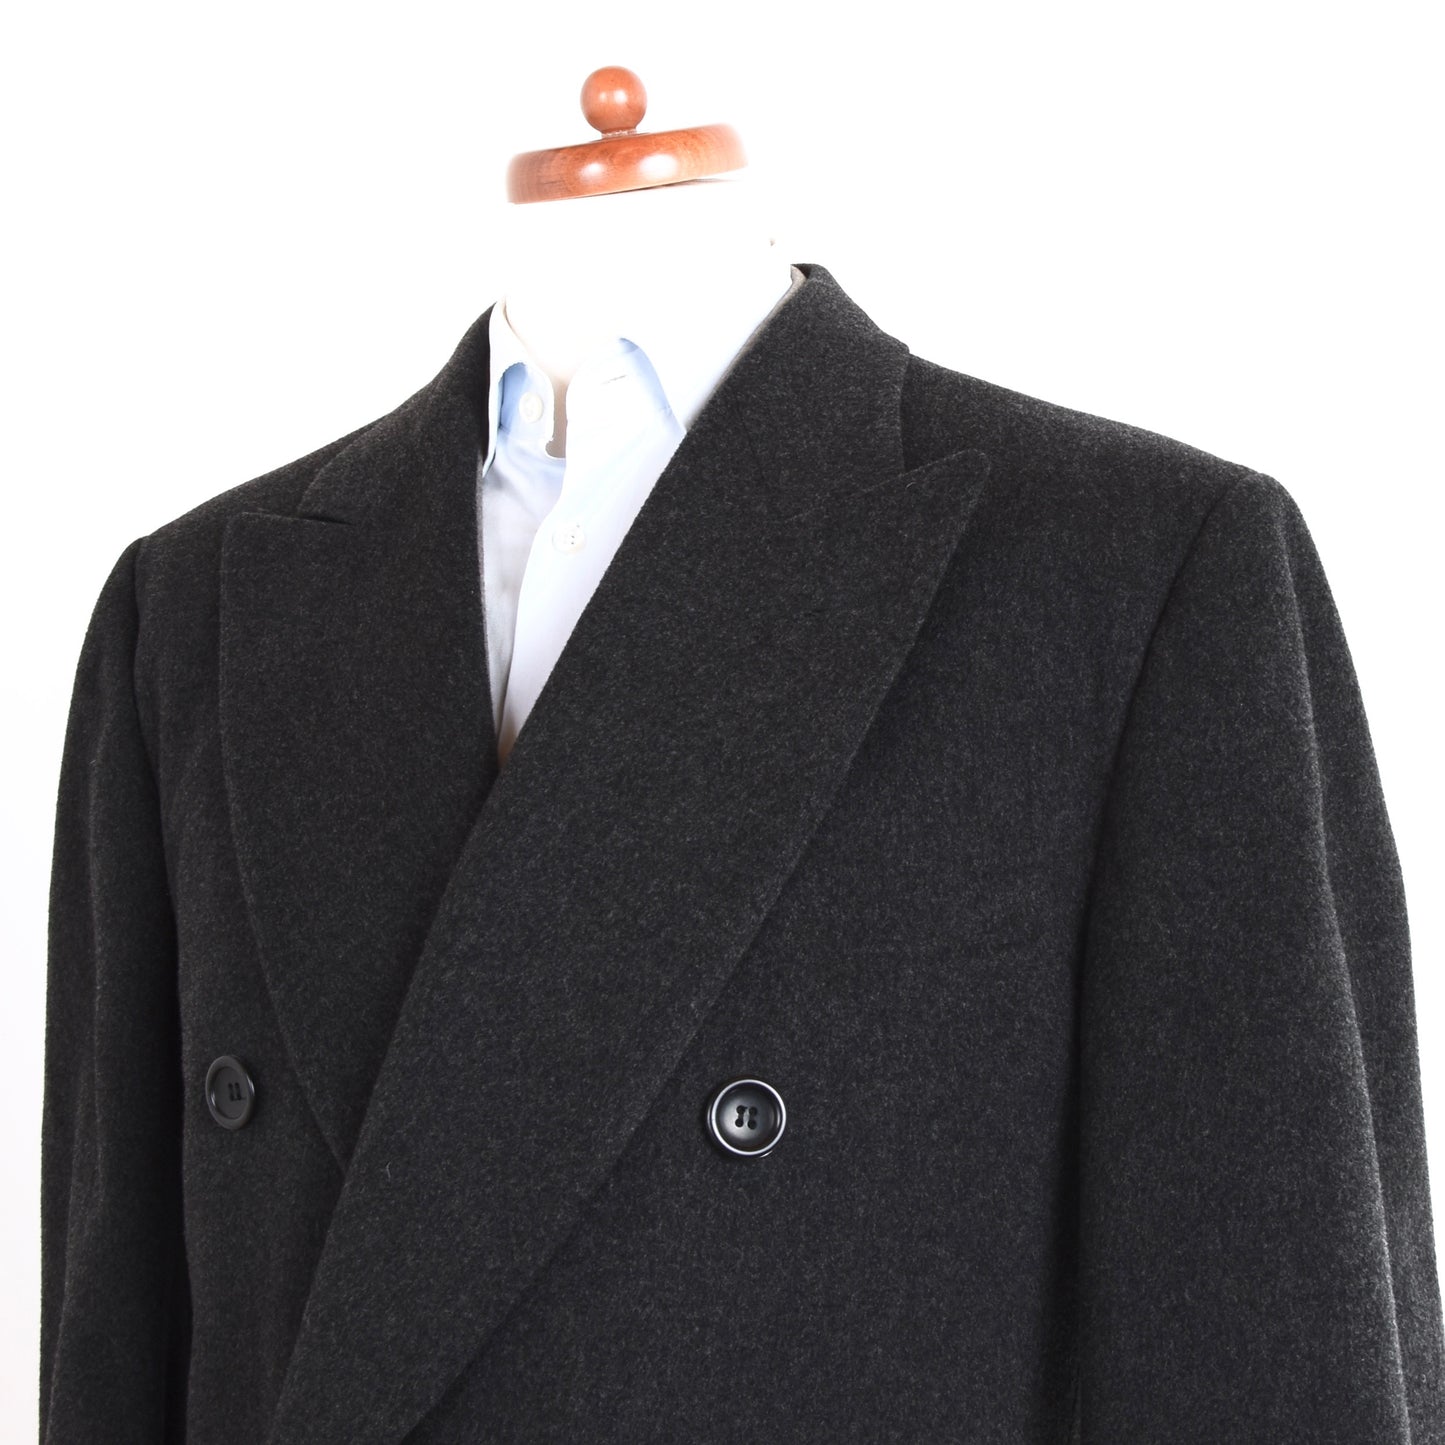 Canali Proposta Wool/Cashmere Double-Breasted Overcoat Size 50  - Charcoal